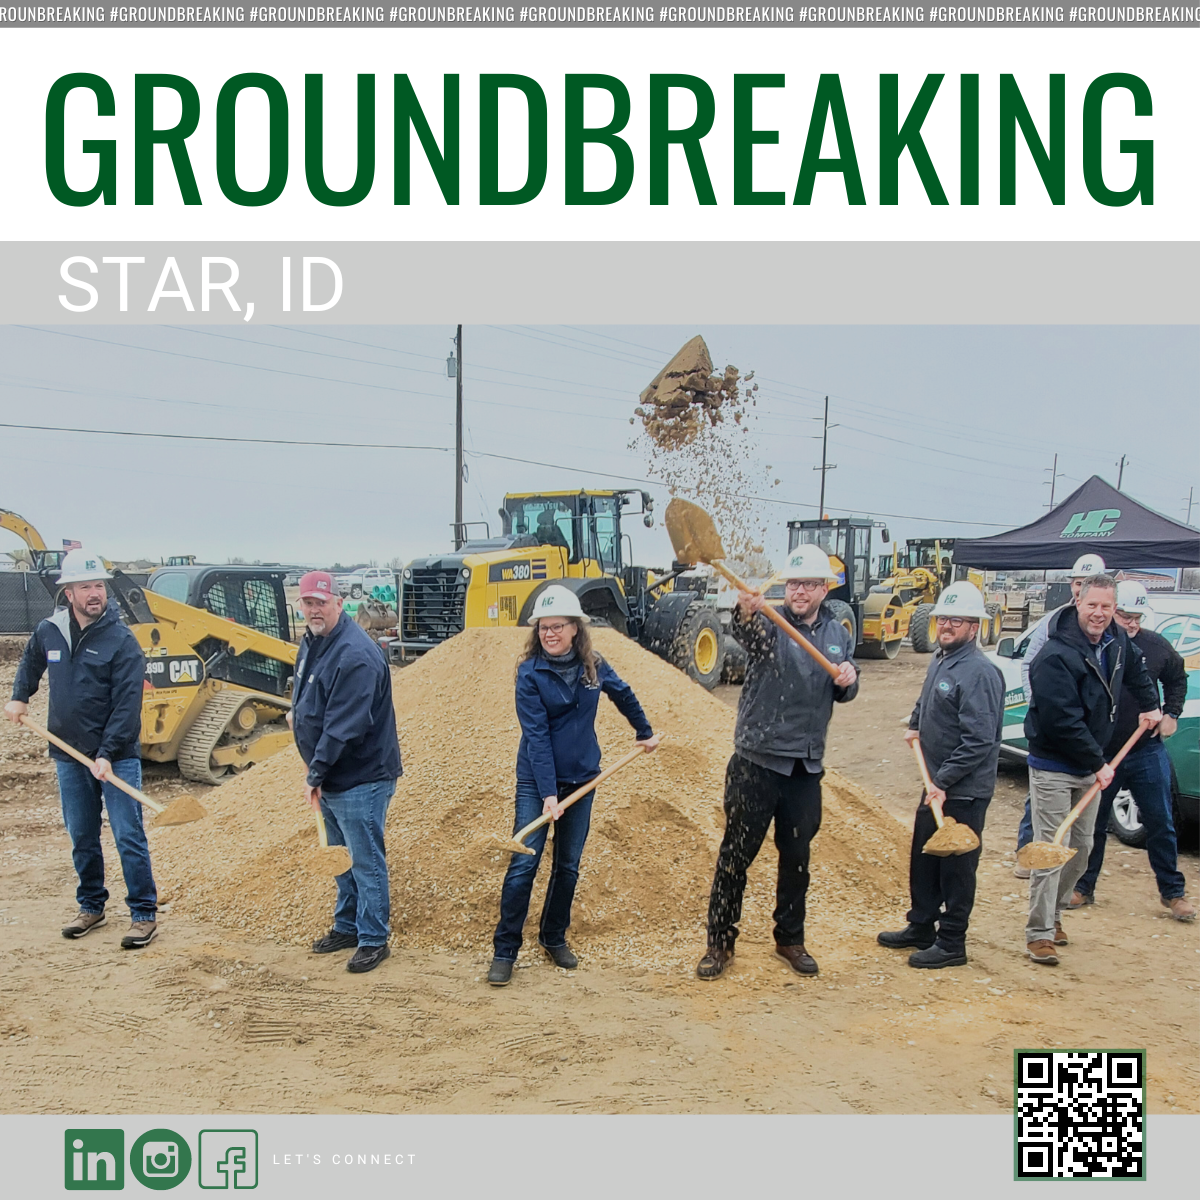 Christian Brothers Breaks Ground on their Newest Location in Star, Idaho!